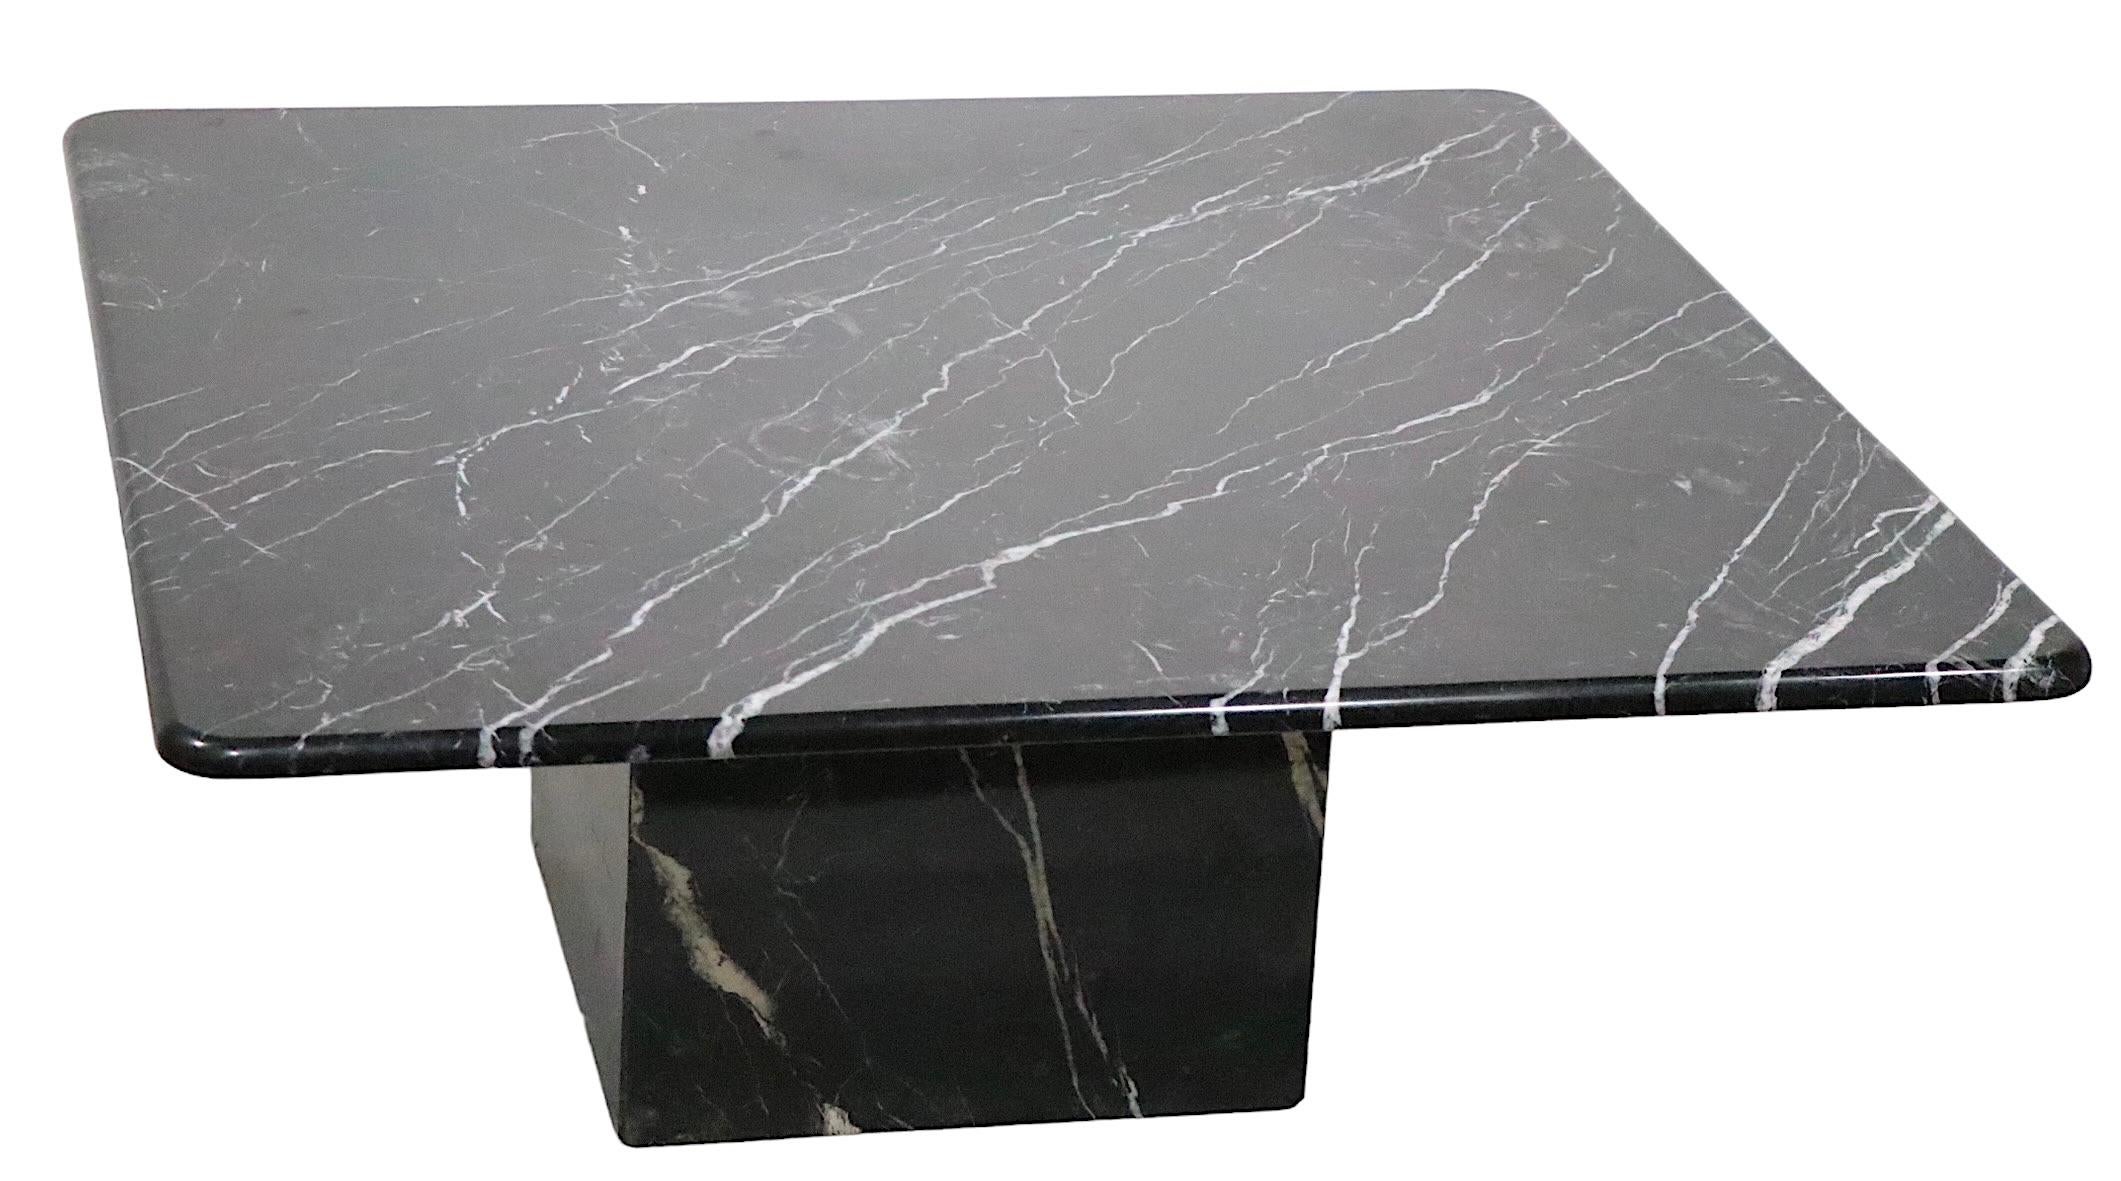 Post-Modern Post Modern Black Marble Pedestal Base Coffee Table Made in Italy c 1970’s For Sale